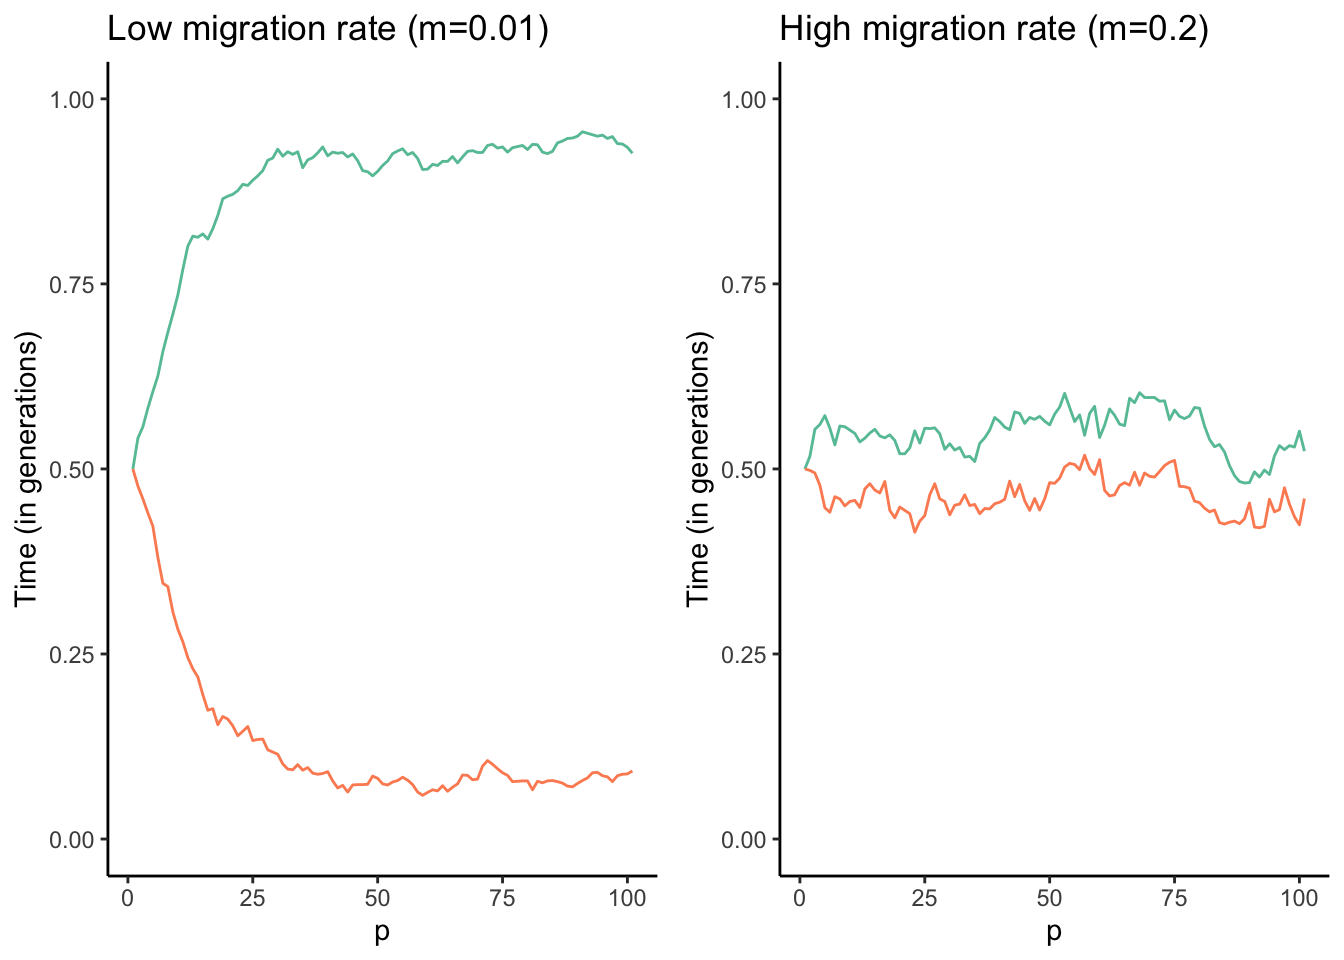 Results of a combined simulation of drift, selection, and migration. The optimal allele frequency for population 1 (red) is *p*=1, and the optimal frequency for population 2 (blue) is *p*=0. The two models ran were identical except for the migration rate between the two populations. As you can see, populations approach their respective optimal allele frequencies when migration rates are low (left graph). In contrast, higher migration rates continuously homogenize allele frequencies across the populations, and accordingly allele frequencies hover around *p*=0.5 (right graph).